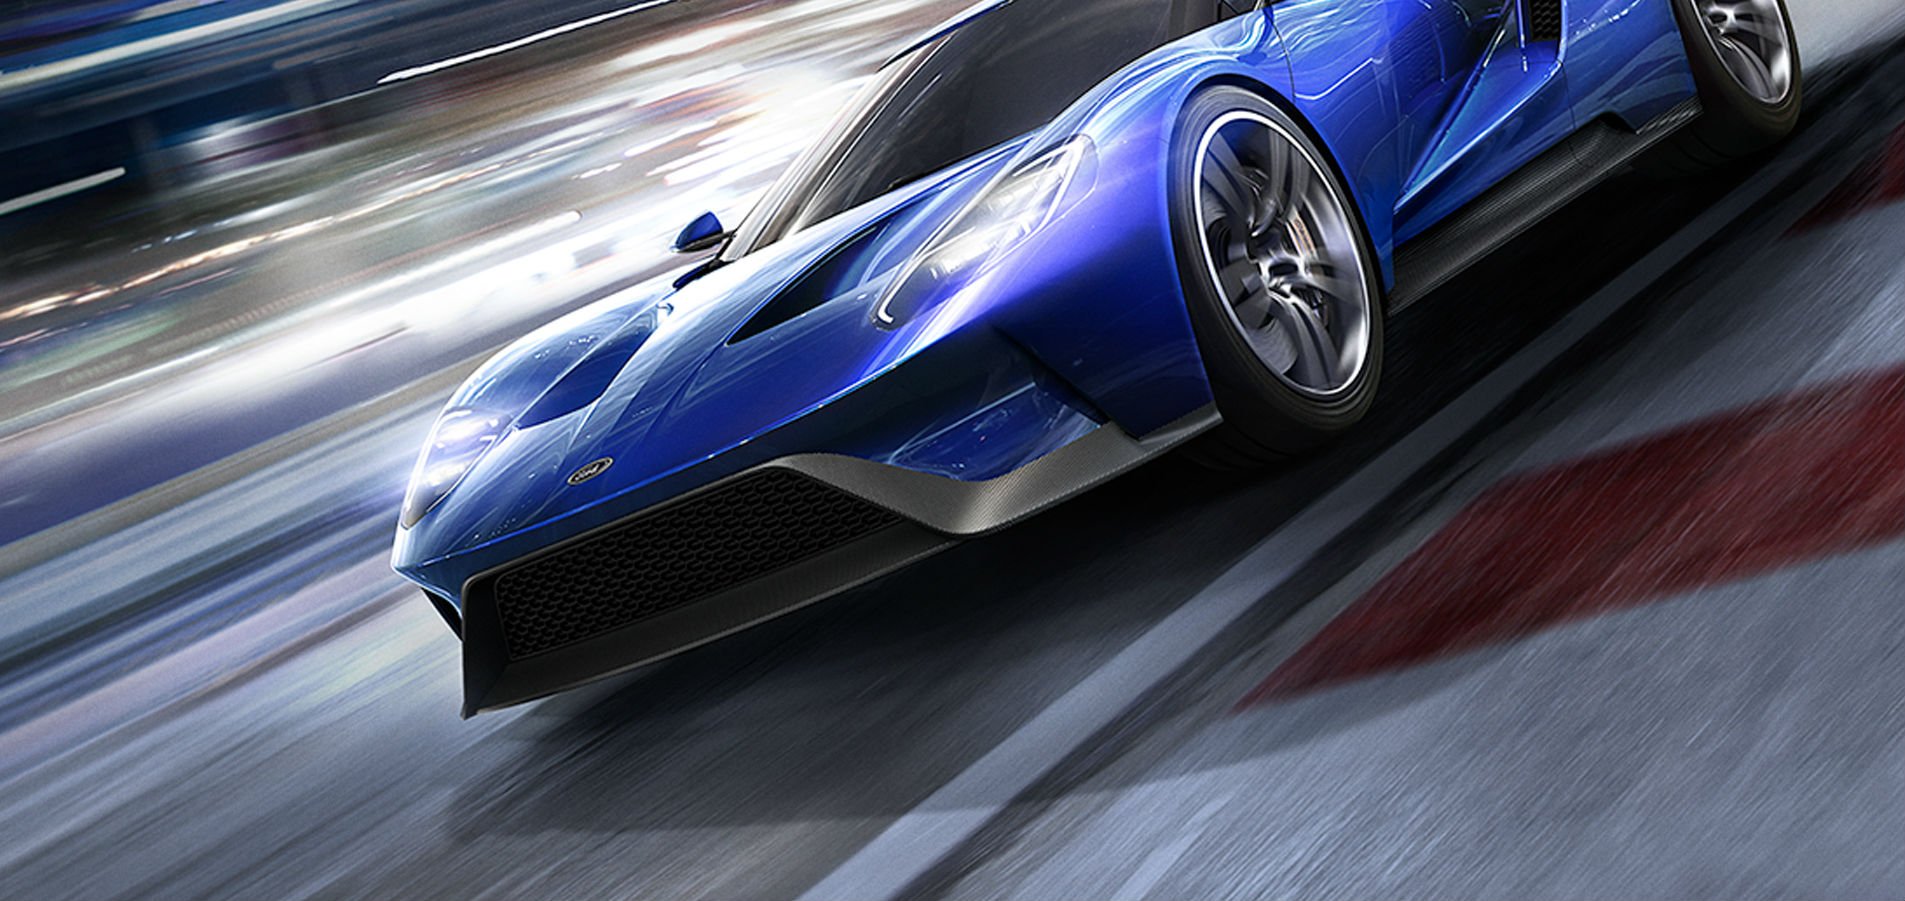 The New Forza Motorsport Makes Smart Changes To Career Mode and AI